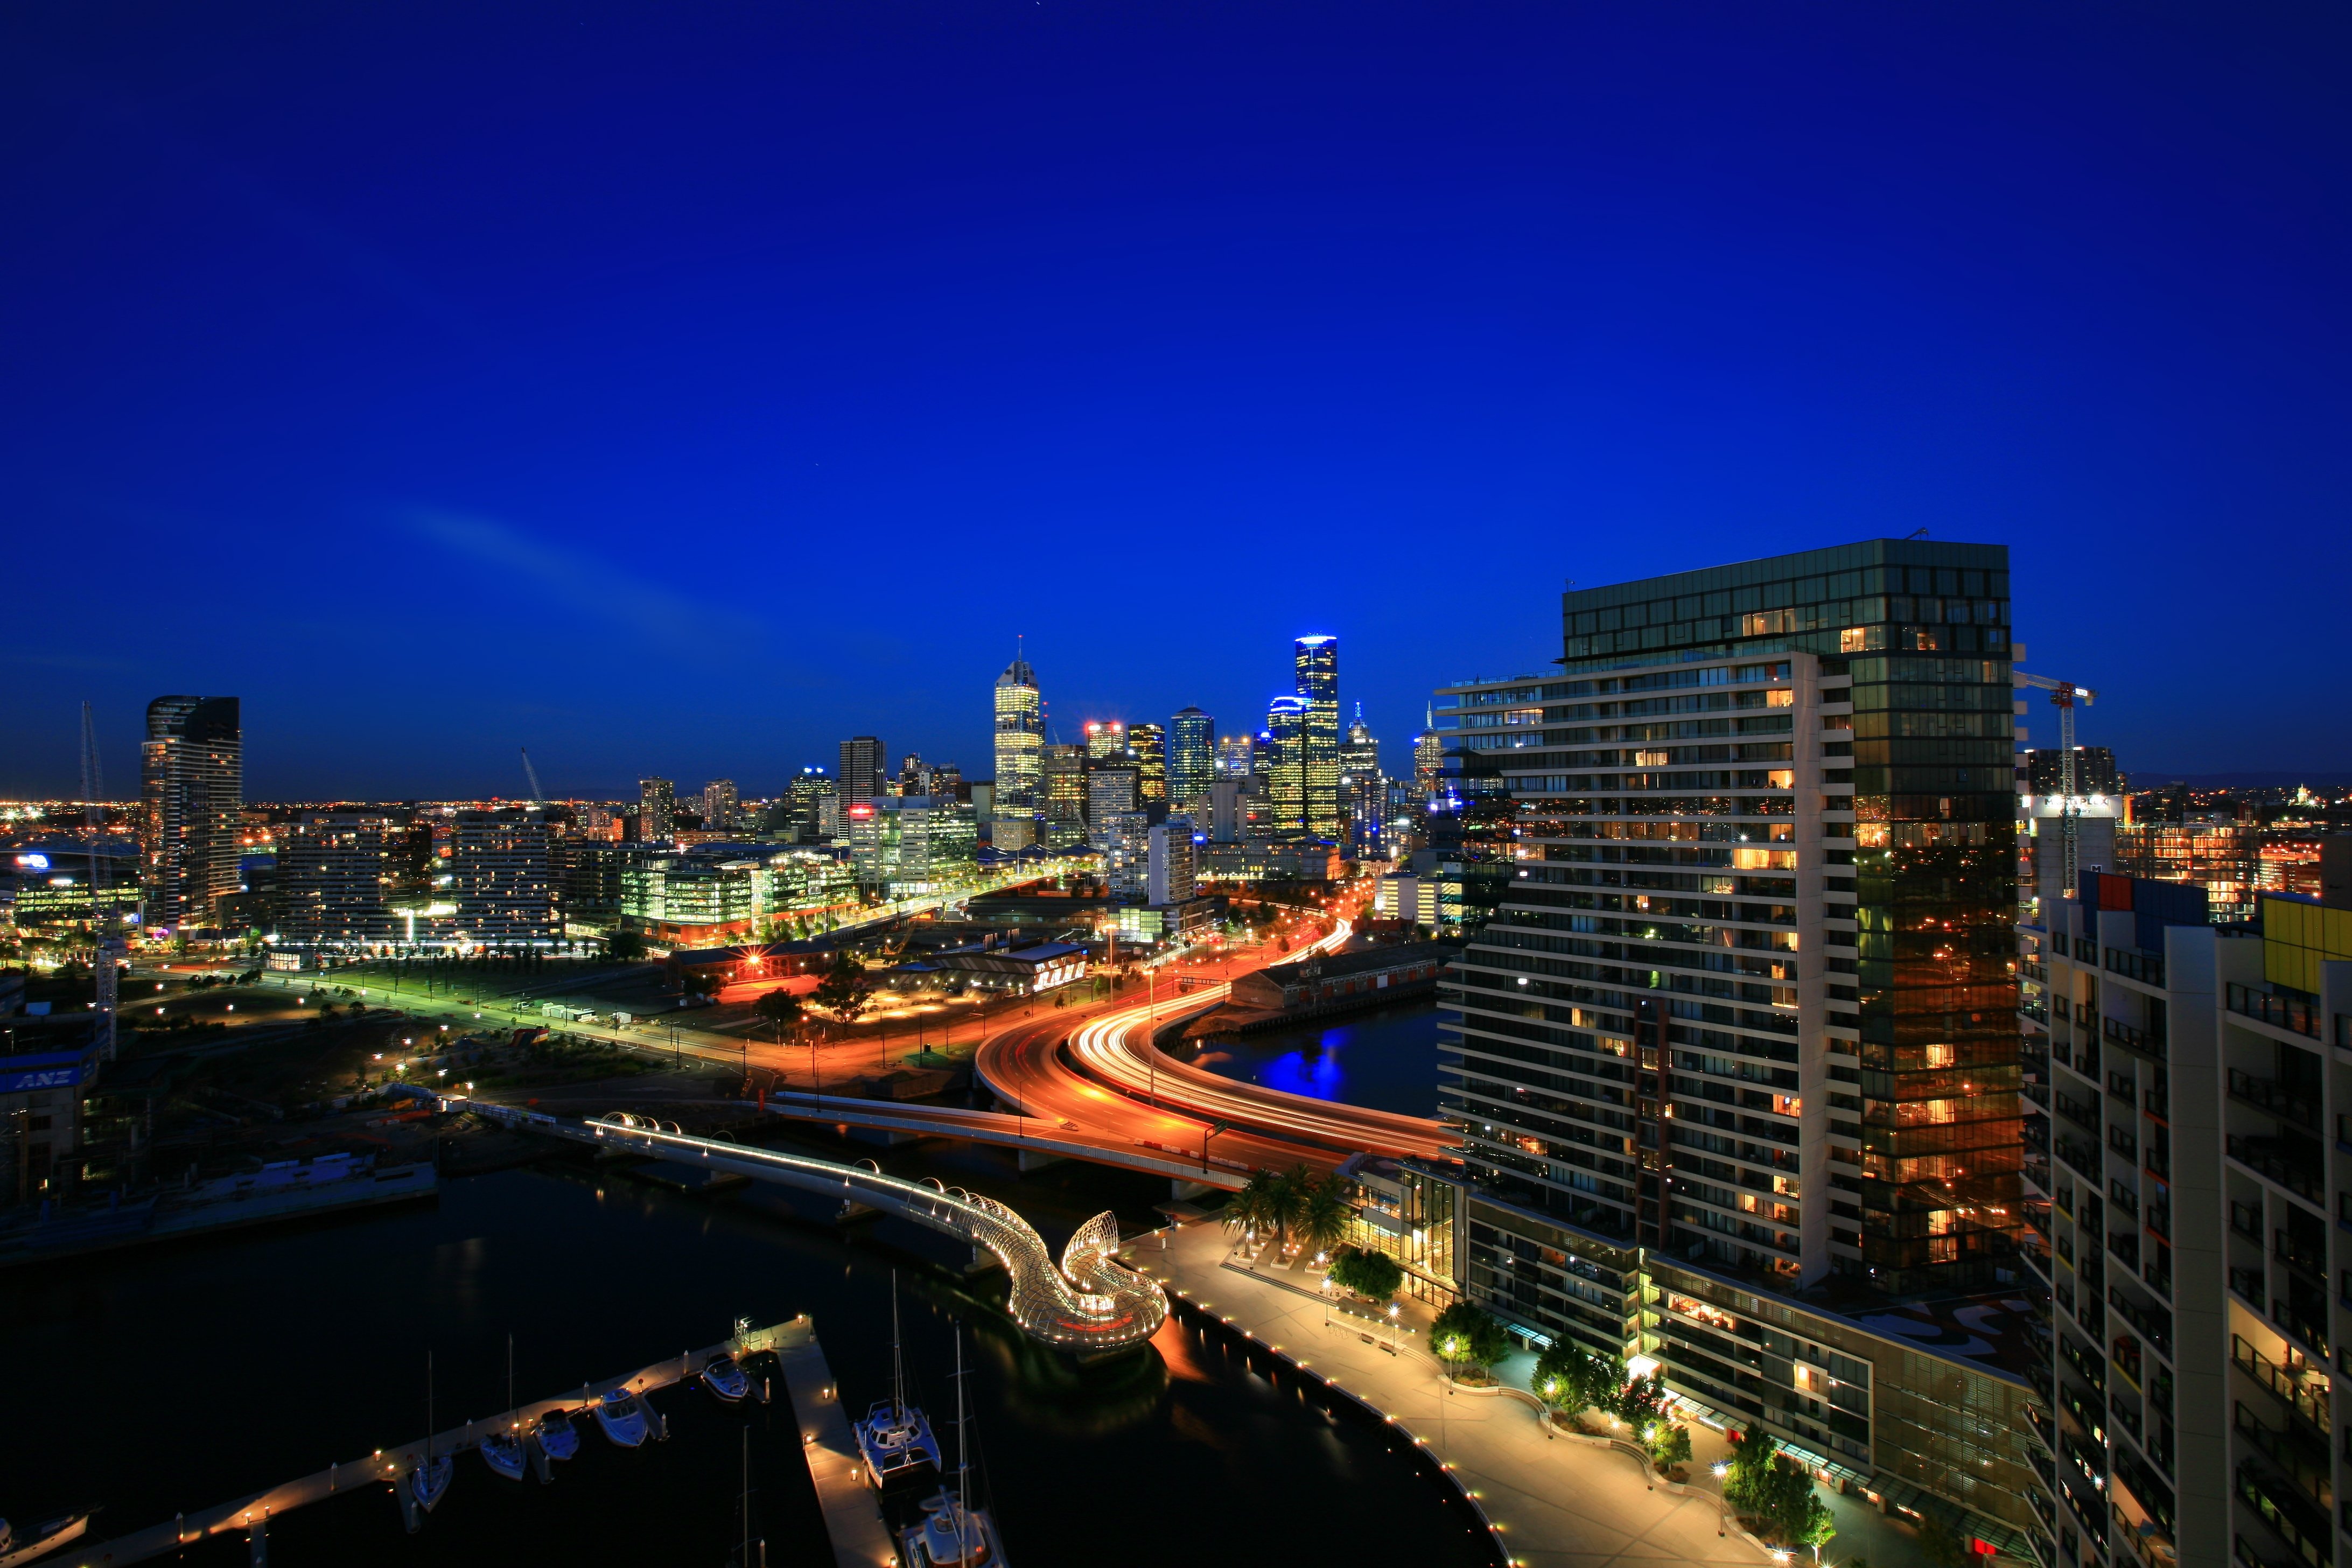 melbourne, Australia, Country, City, Lights, Evening, Buildings, Sky, Blue, Skyscrapers, Hotels, Port, Boats, Sea Wallpaper